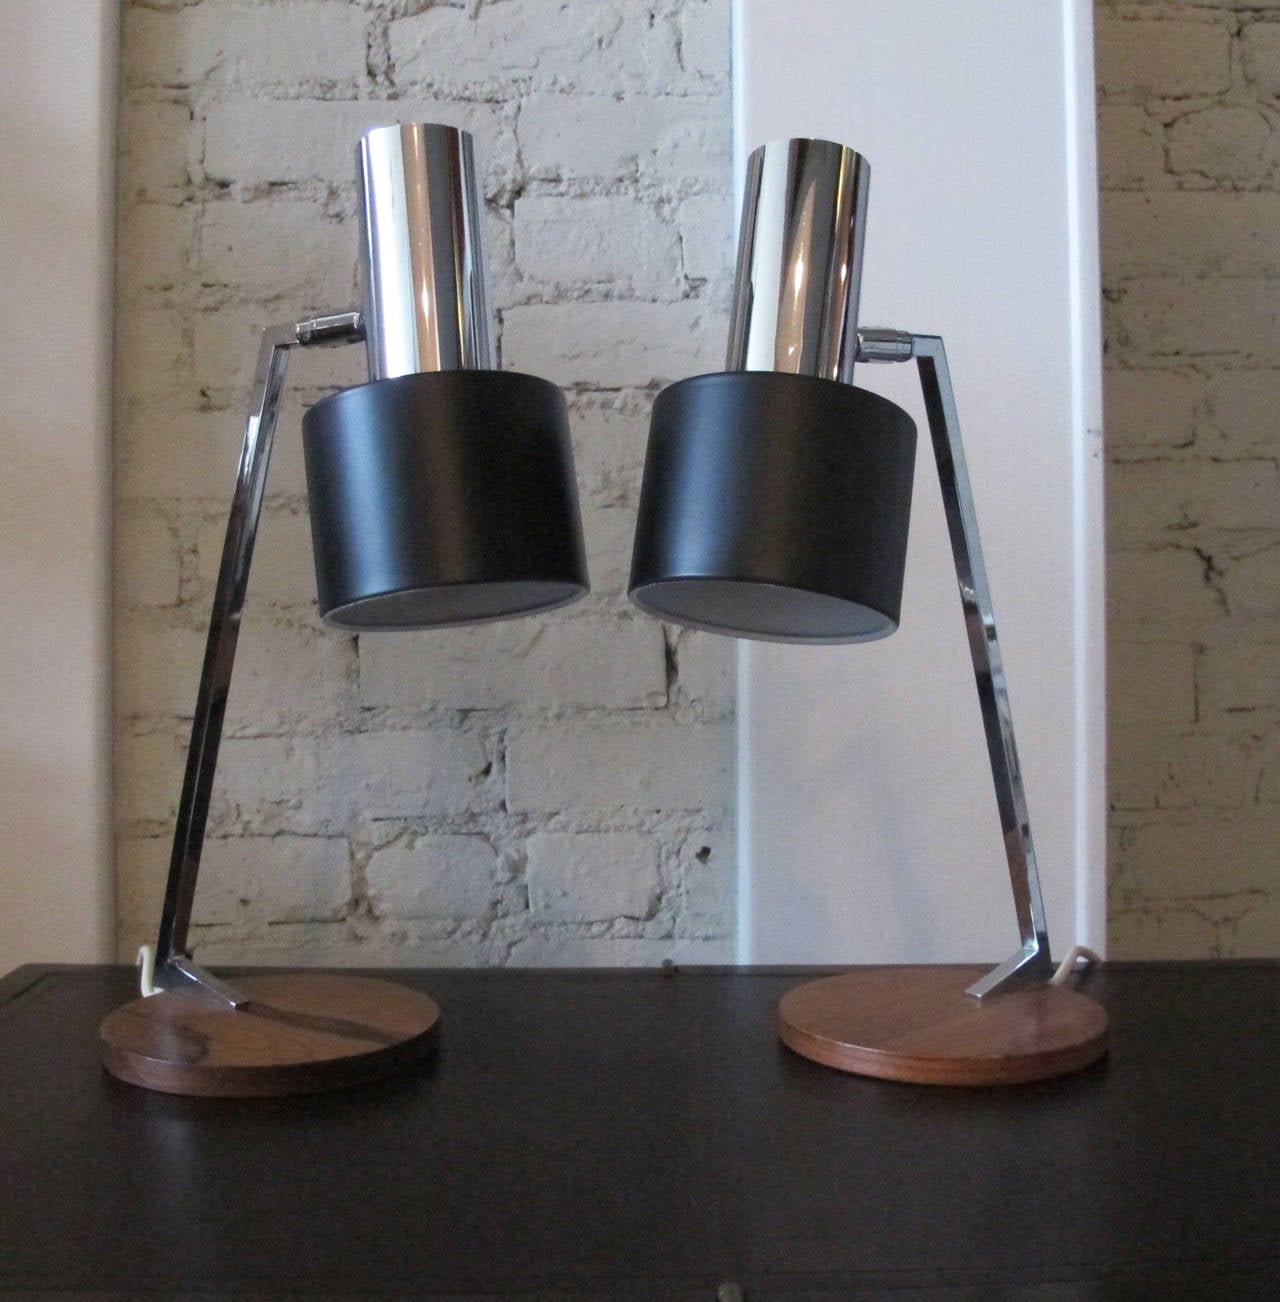 Pair of Fog & Mørup desk lamps with rosewood bases, chrome arms and black-painted steel shades. Price is for the pair. Dimensions are variable as the shades pivot.